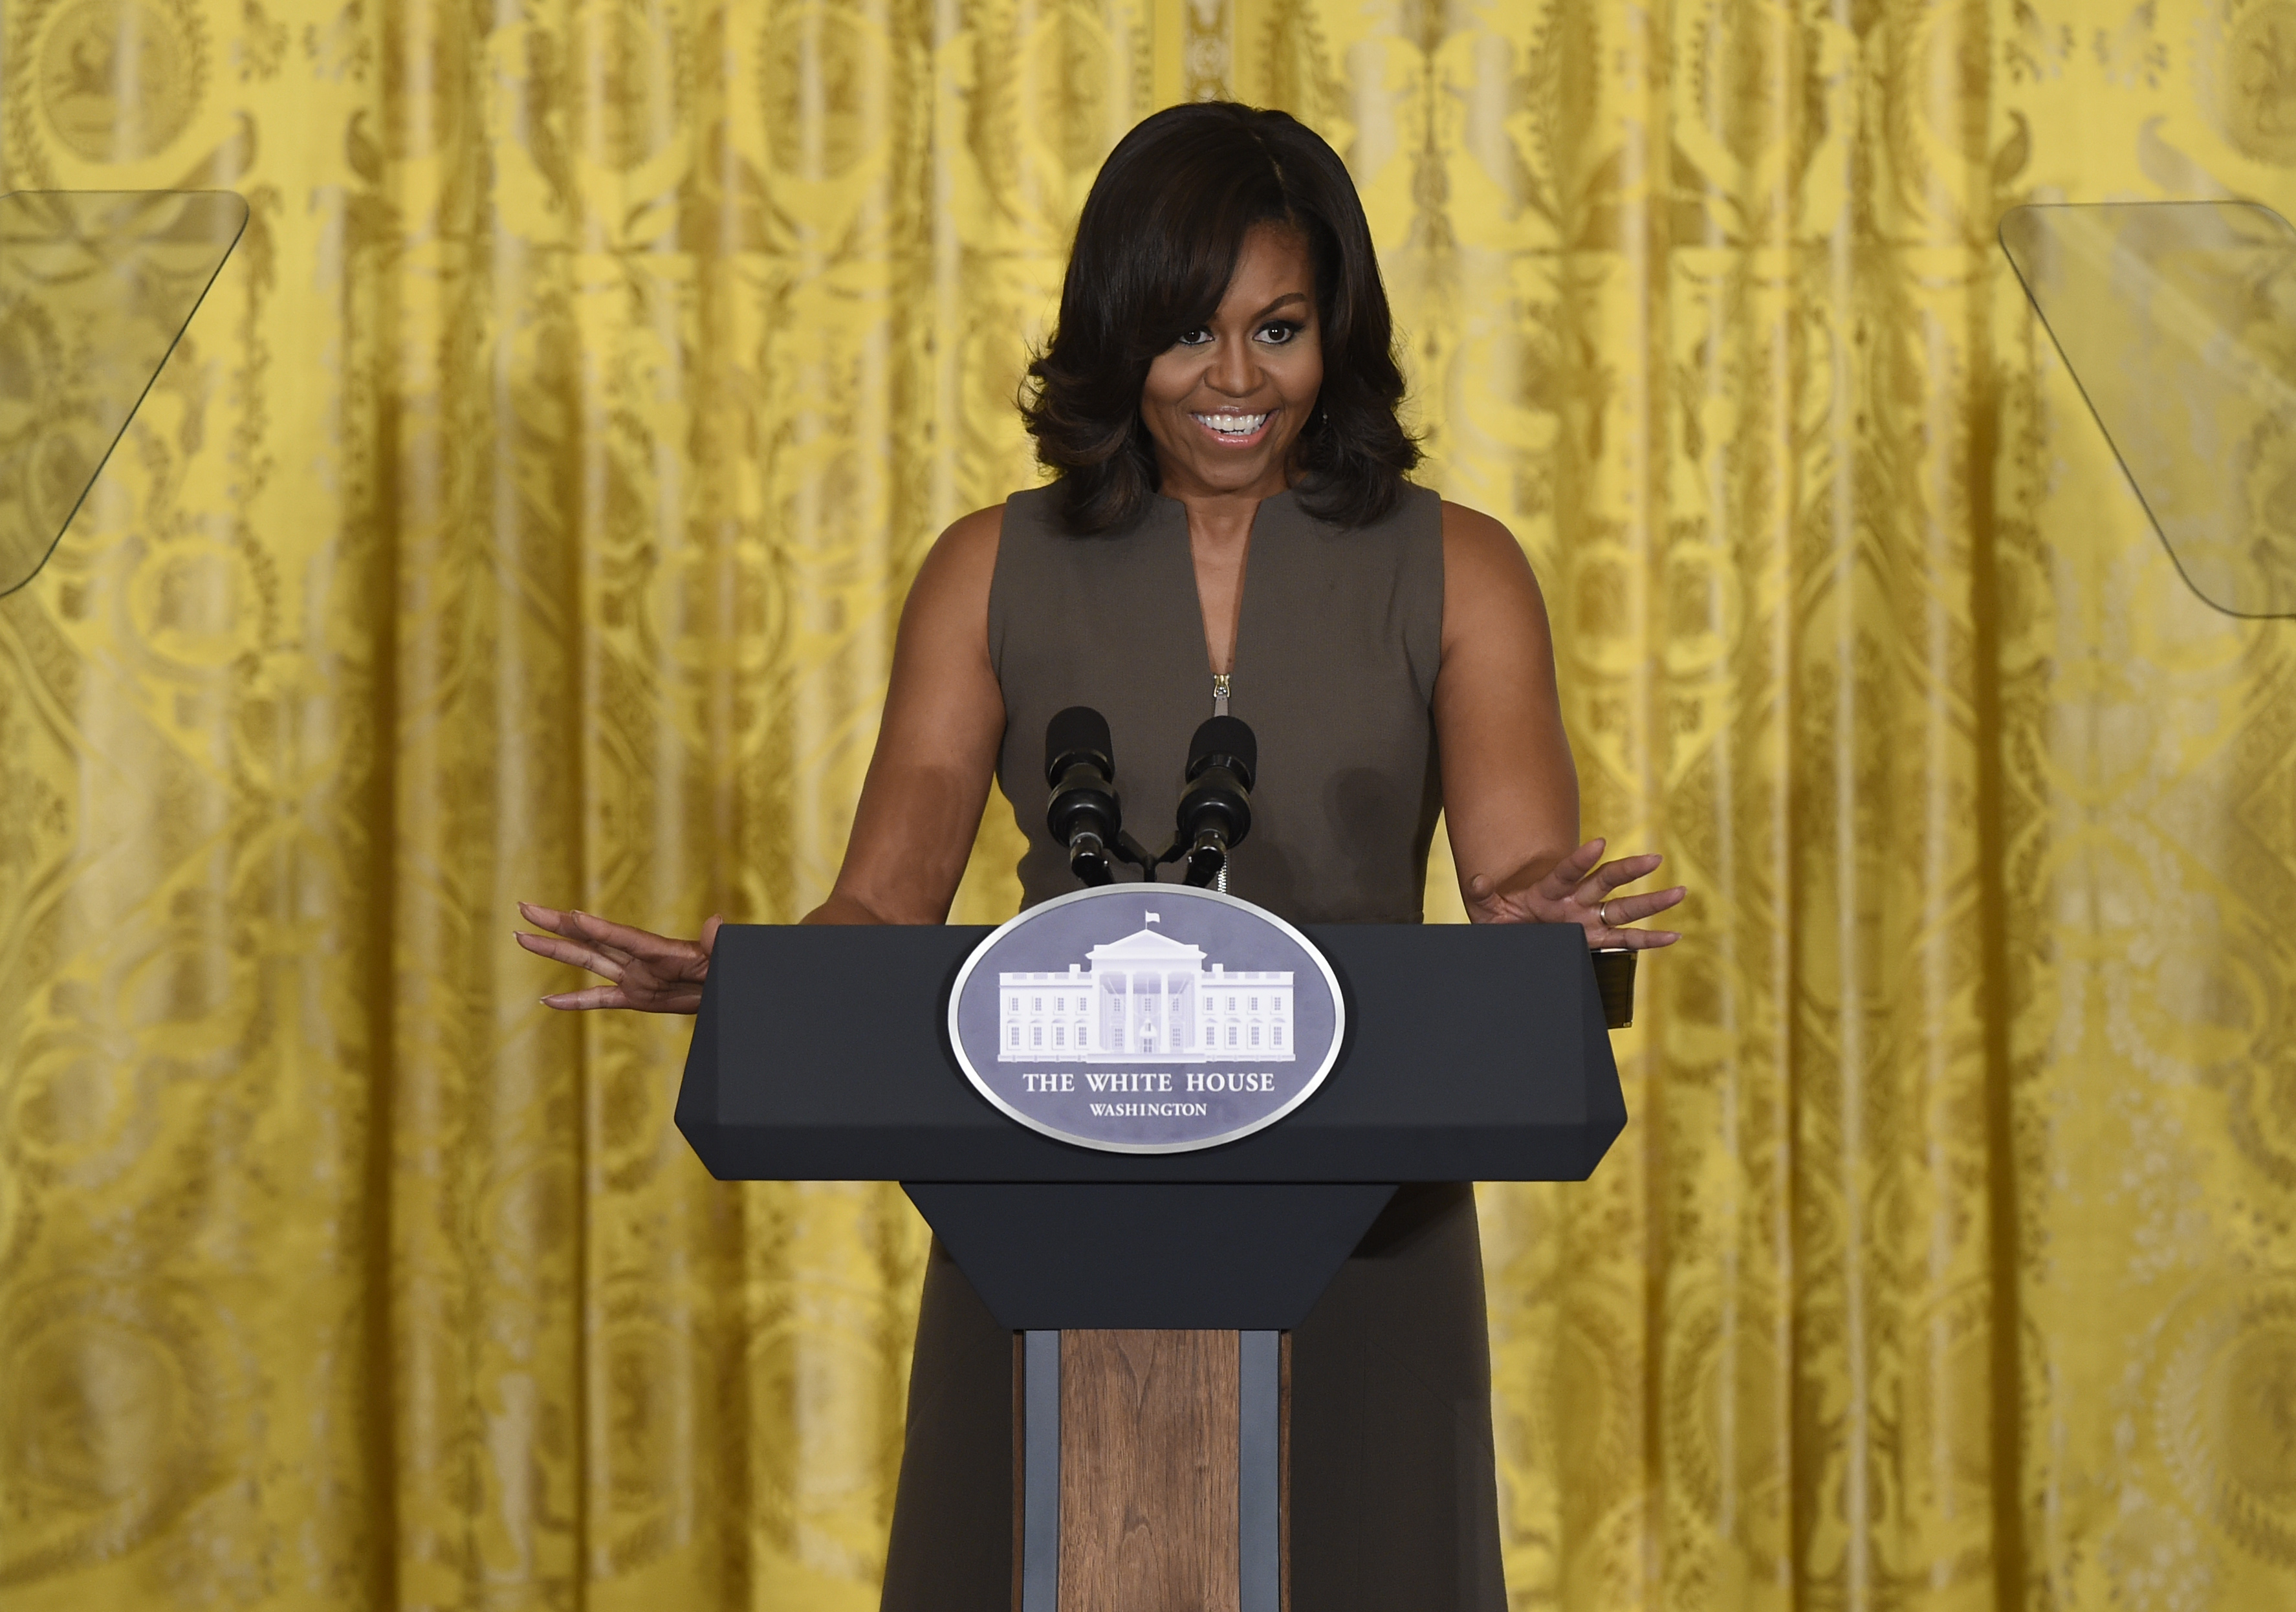 First lady Michelle Obama speaks in the East Room of the White House in Washington, March 15, 2016, for a conversation about the health of kids as part of her Let's Move! initiative. (Susan Walsh&mdash;AP)